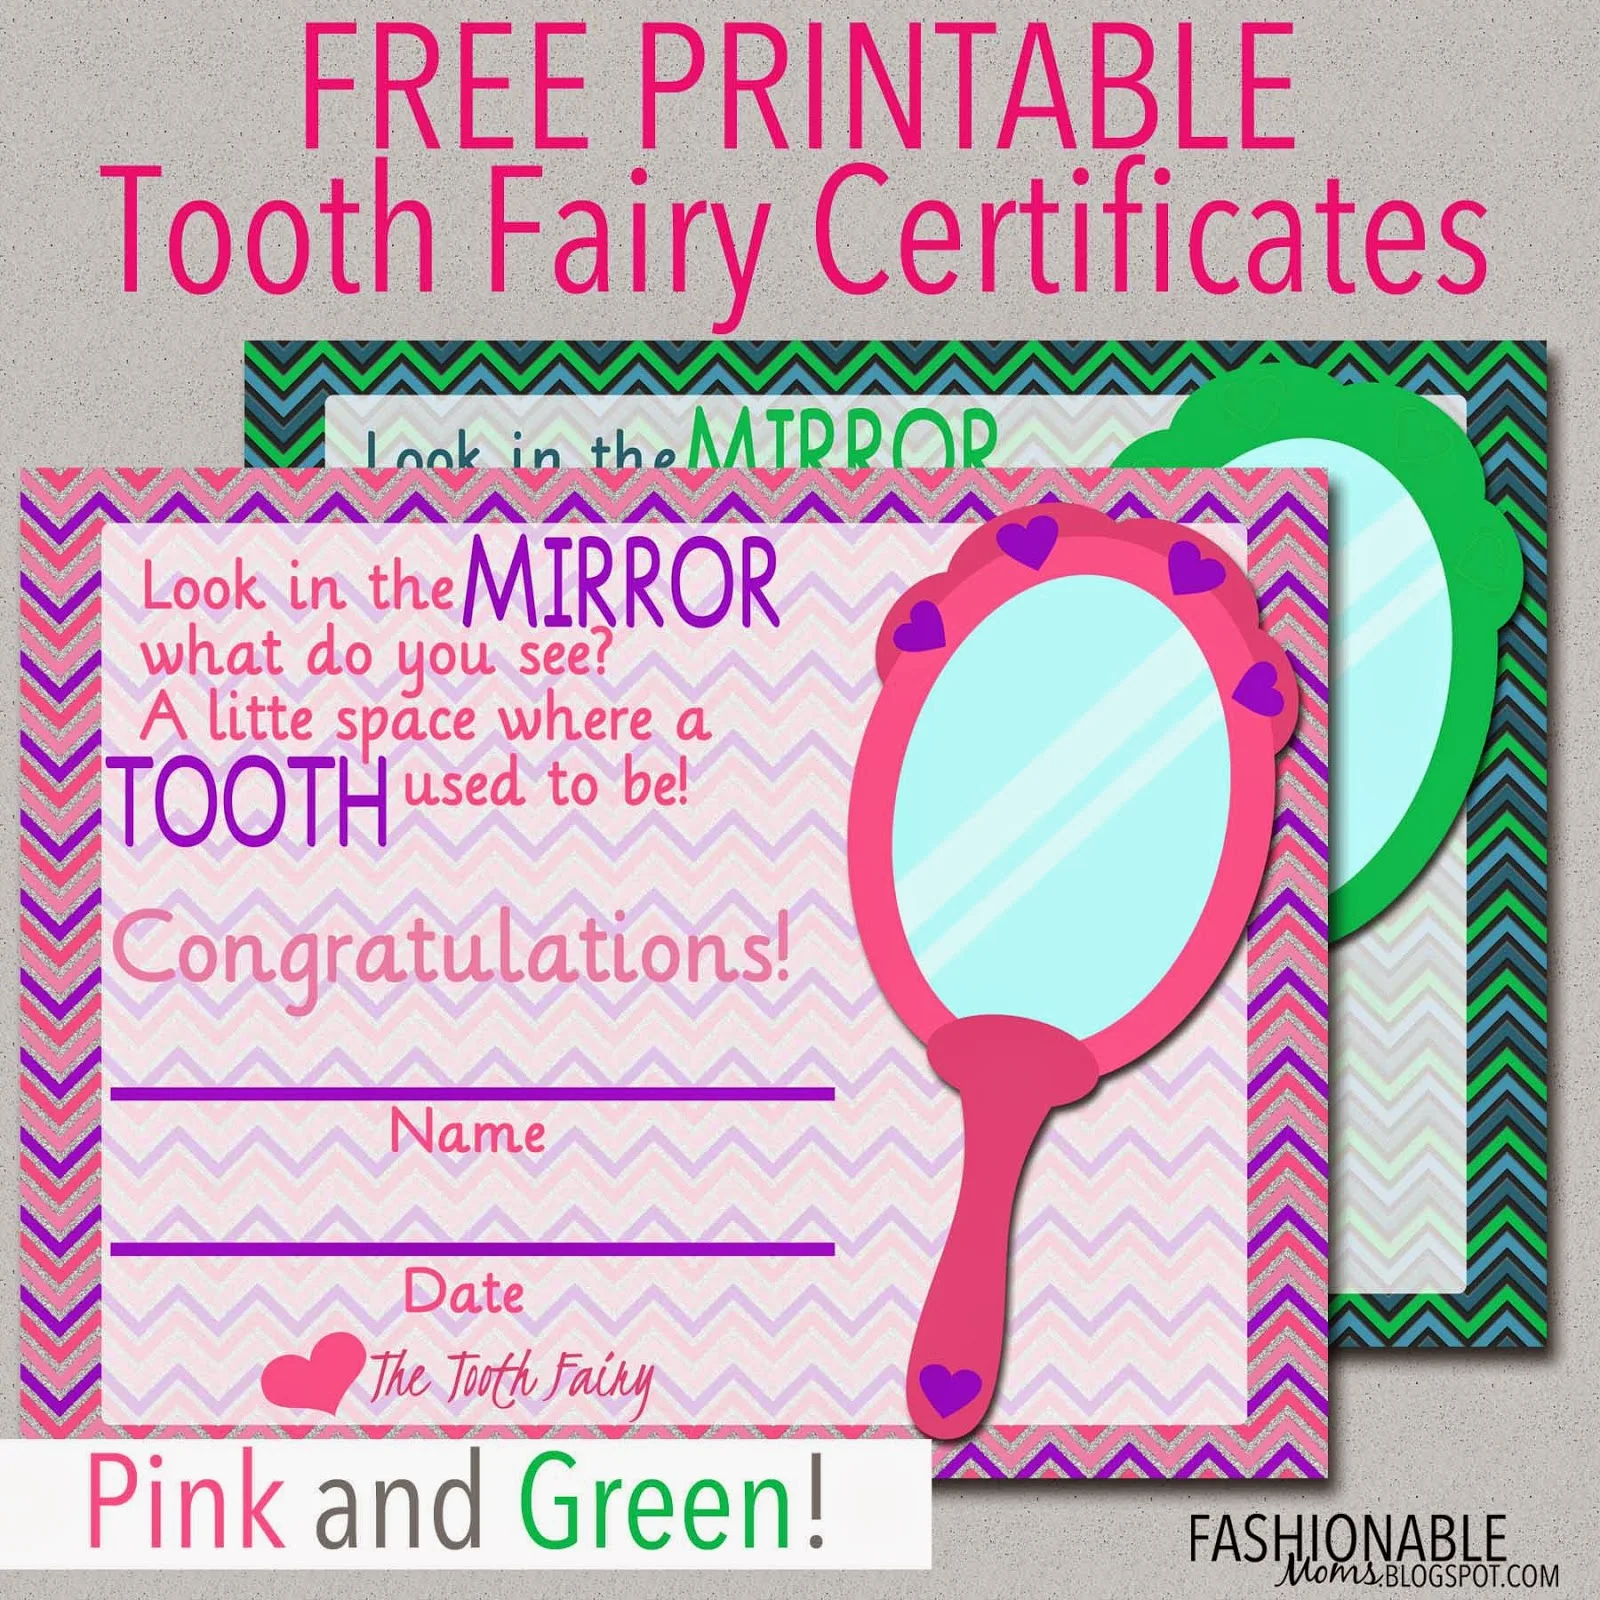 My Fashionable Designs Free Printable Tooth Fairy Certificates